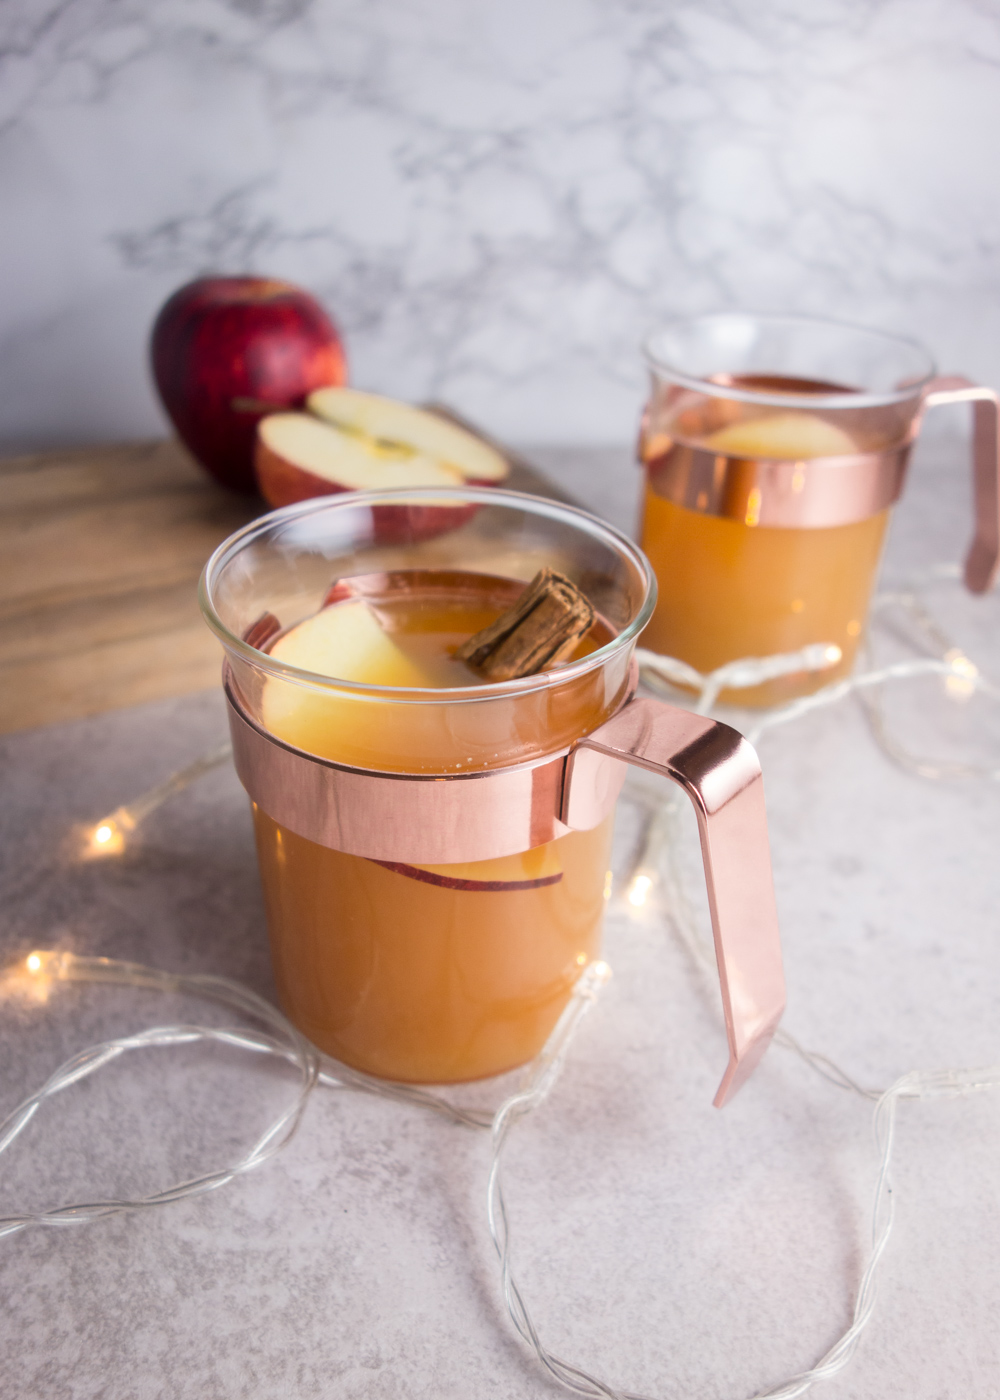 This warm apple Pimms recipe is spiced with orange and cinnamon to create the perfect winter warmer take on Pimms!